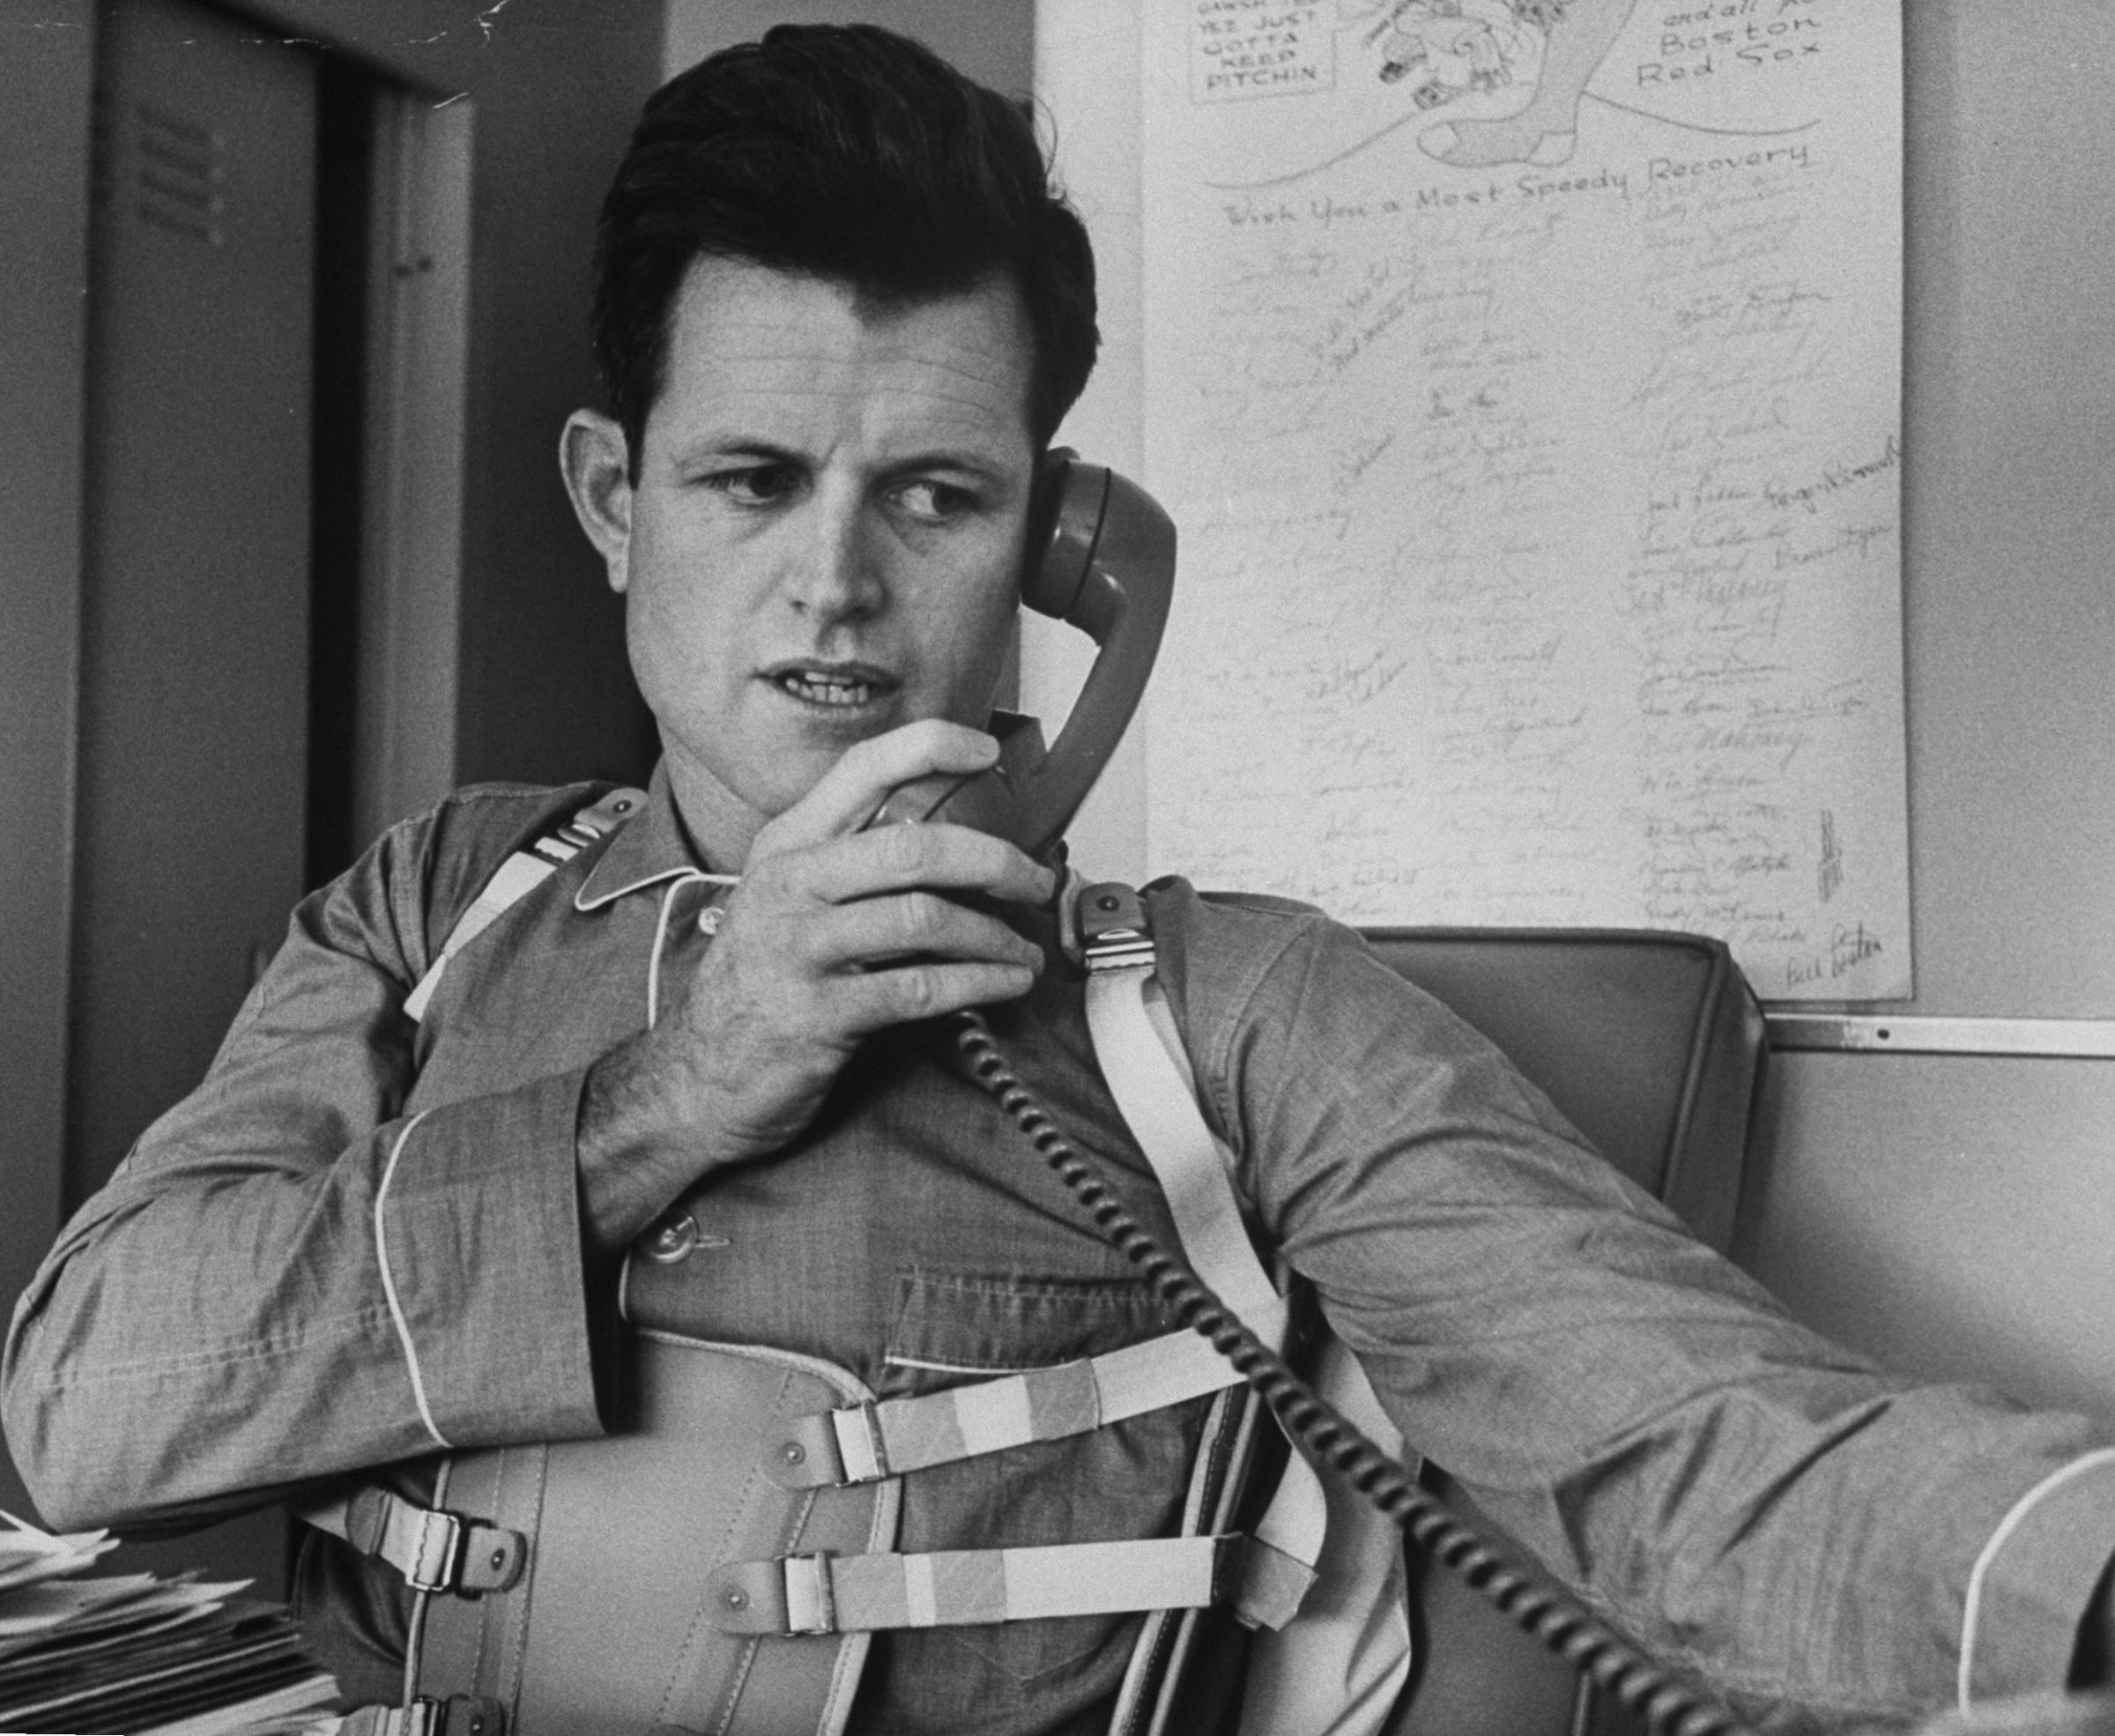 Ted Kennedy on the phone, 1965.